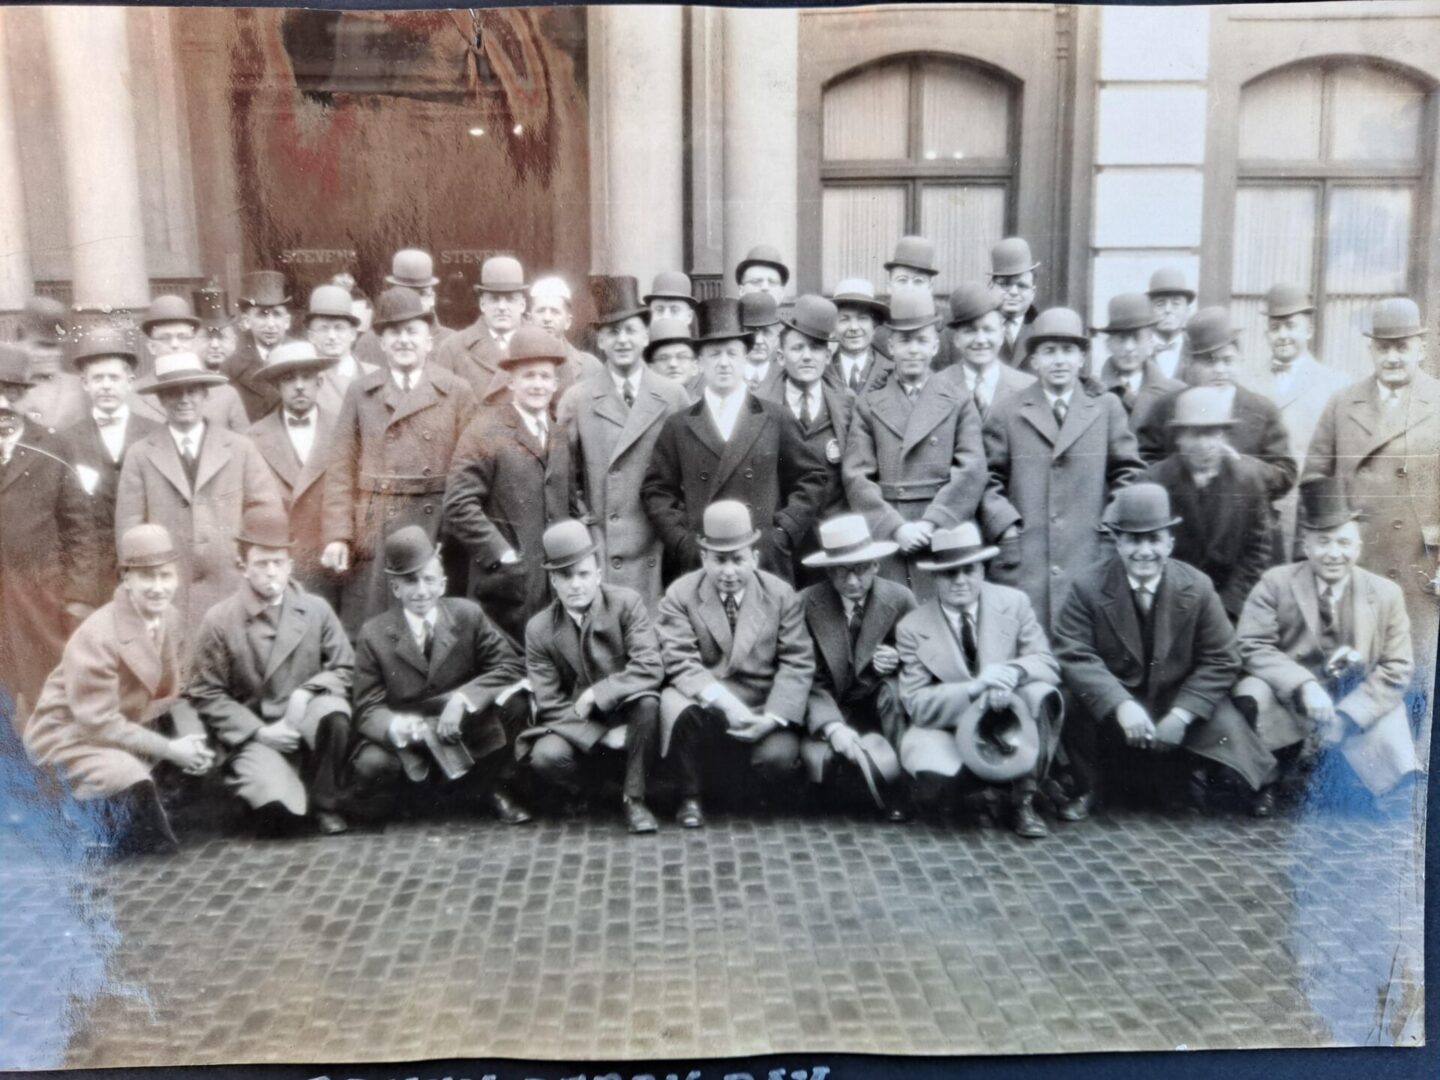 Black and white group photo, people with hats and coats